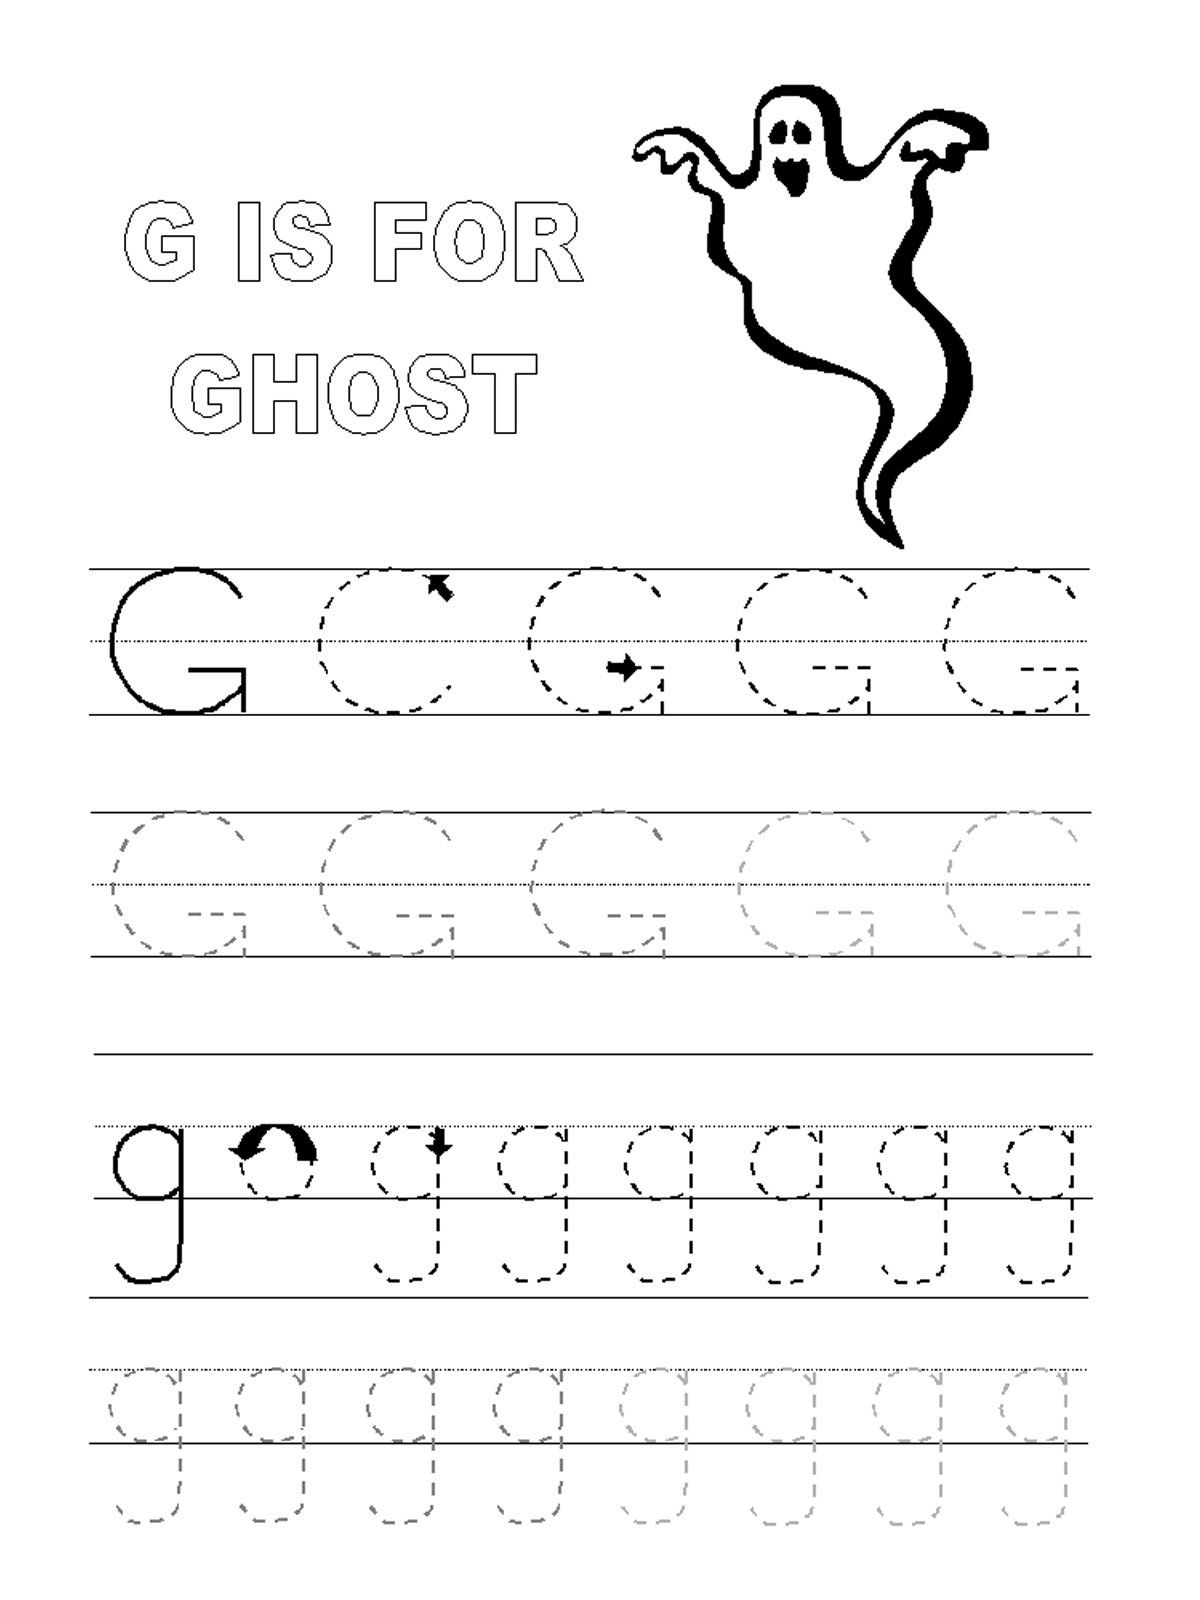 Trace Letter G Worksheets In 2020 | Tracing Worksheets intended for Letter G Tracing Printable